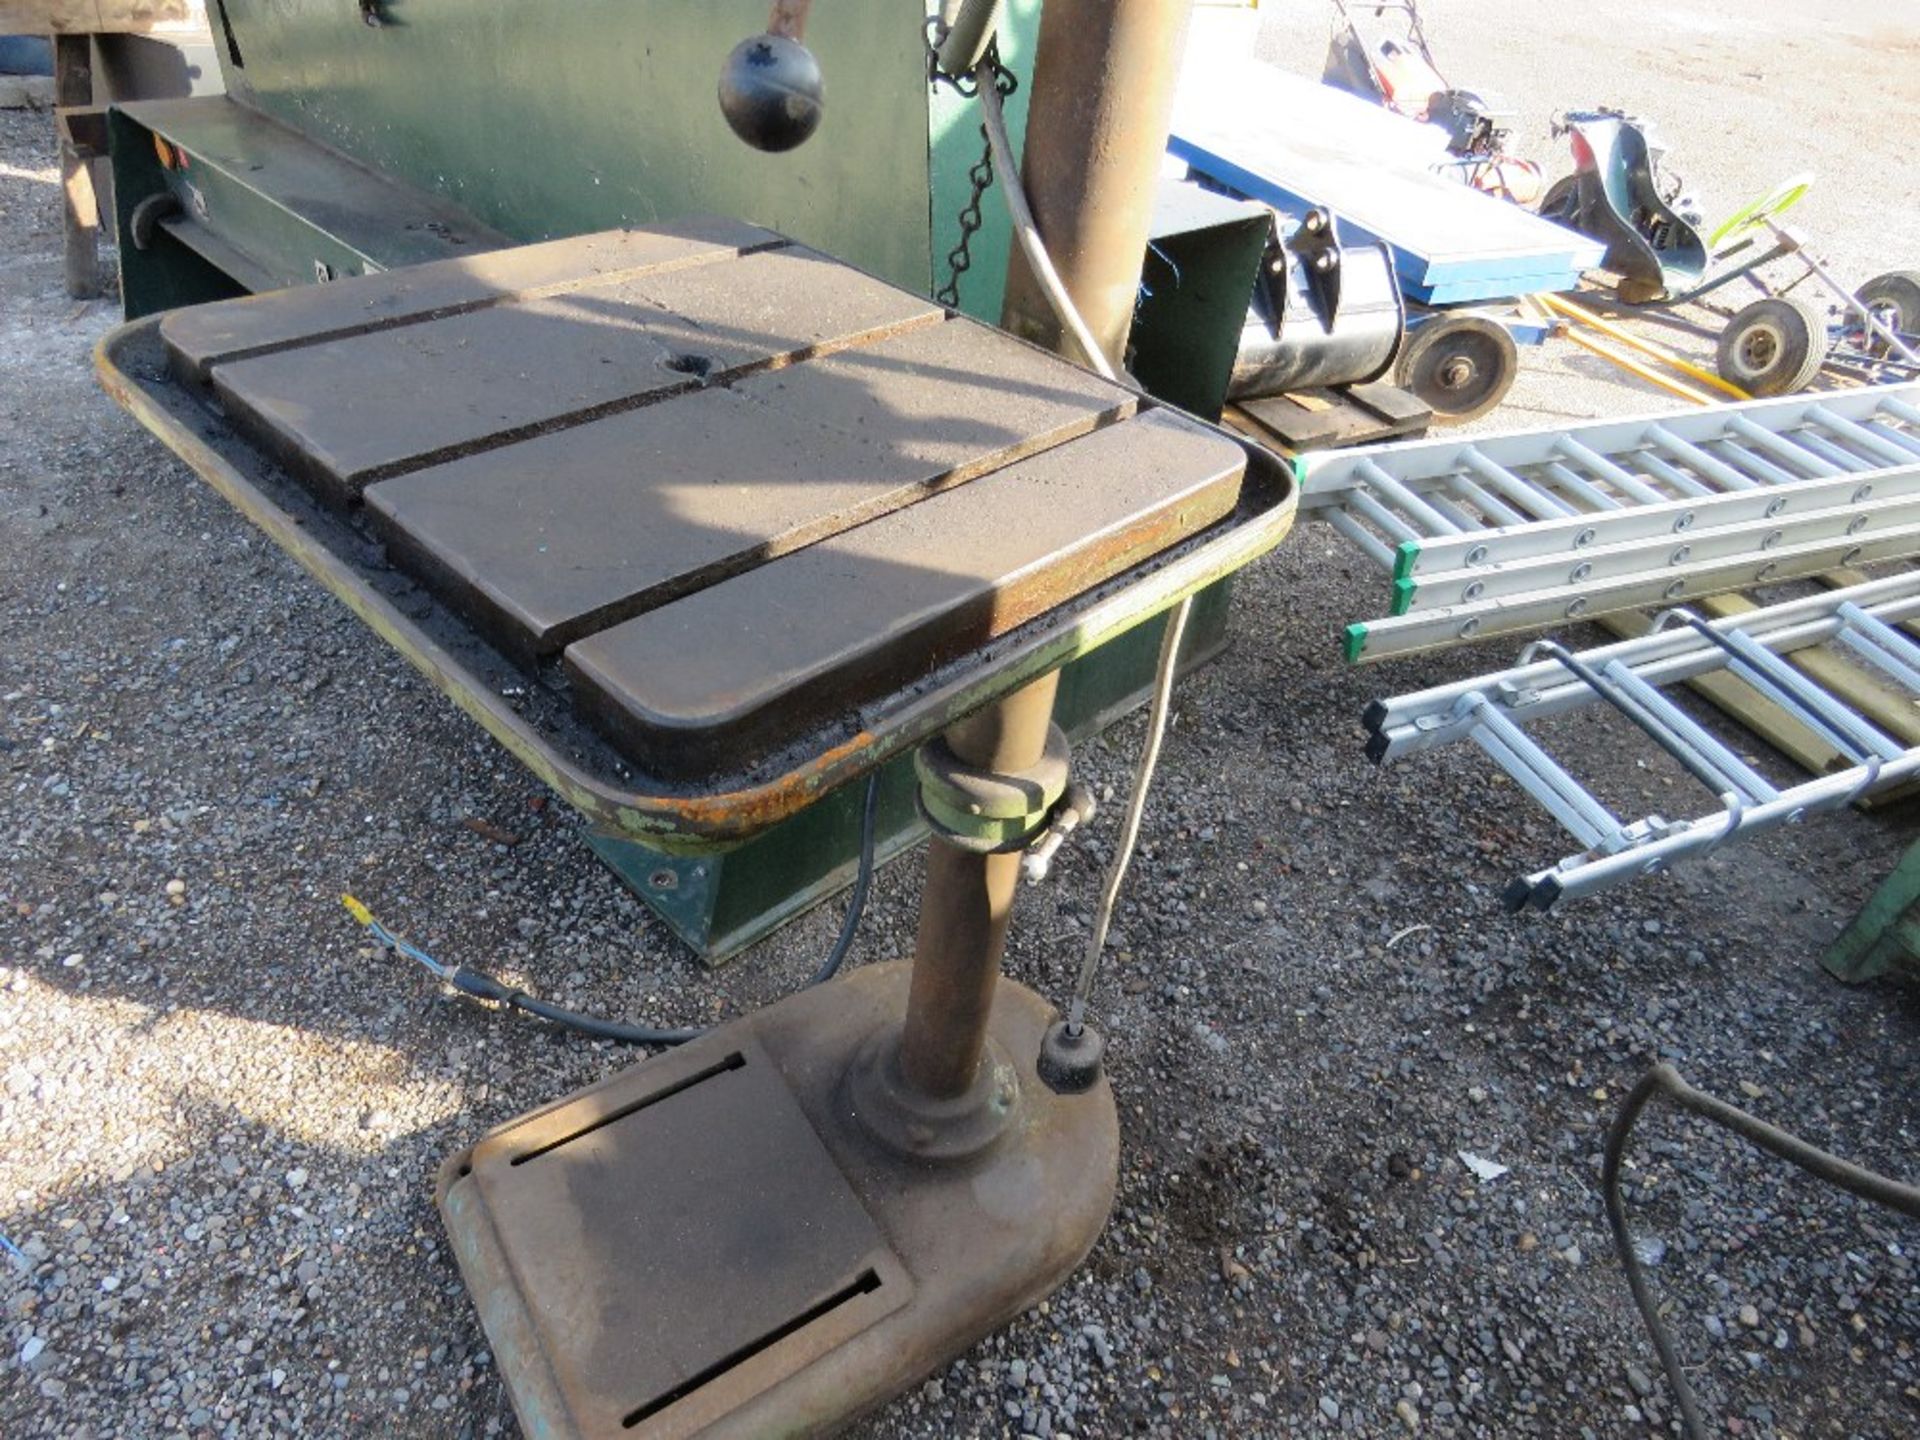 3 PHASE PILLAR DRILL. SOURCED FROM WORKSHOP CLOSURE/LIQUIDATION. - Image 2 of 5